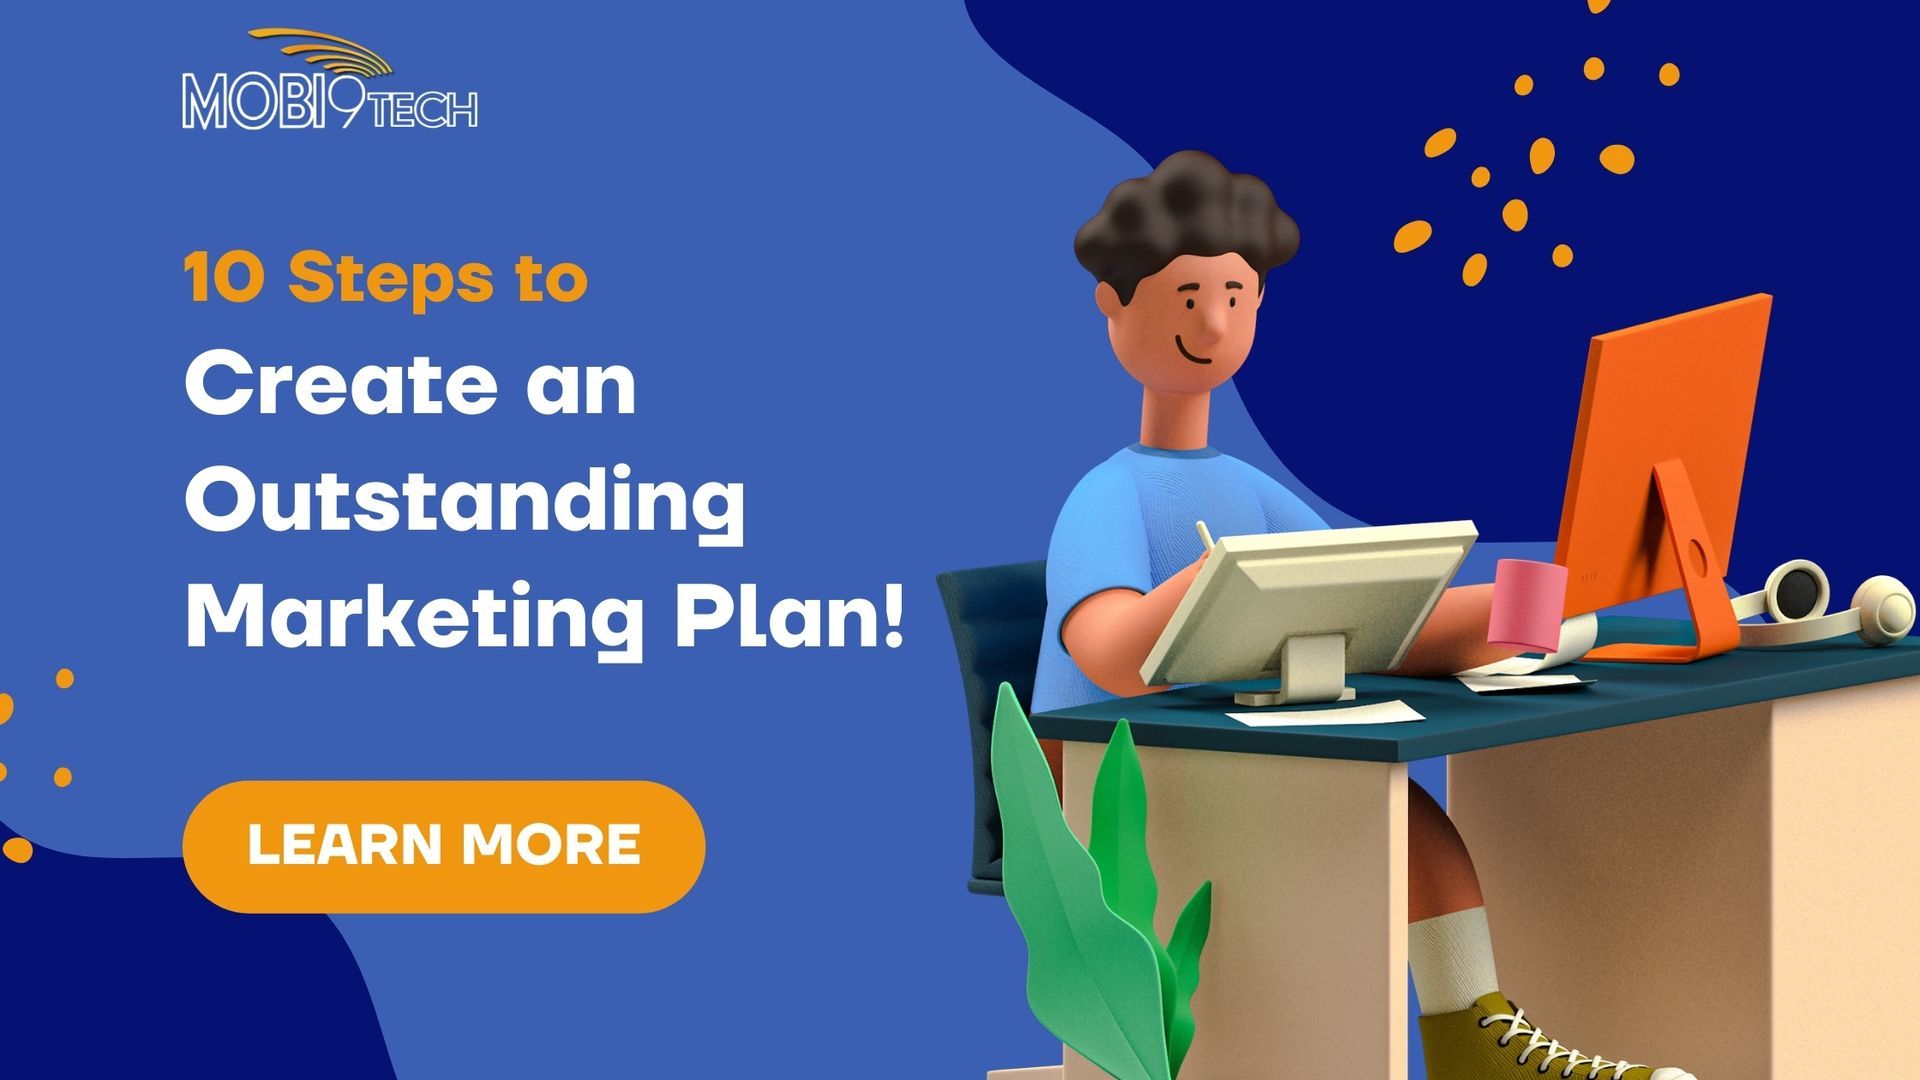 10 Steps to Create an Outstanding Marketing Plan